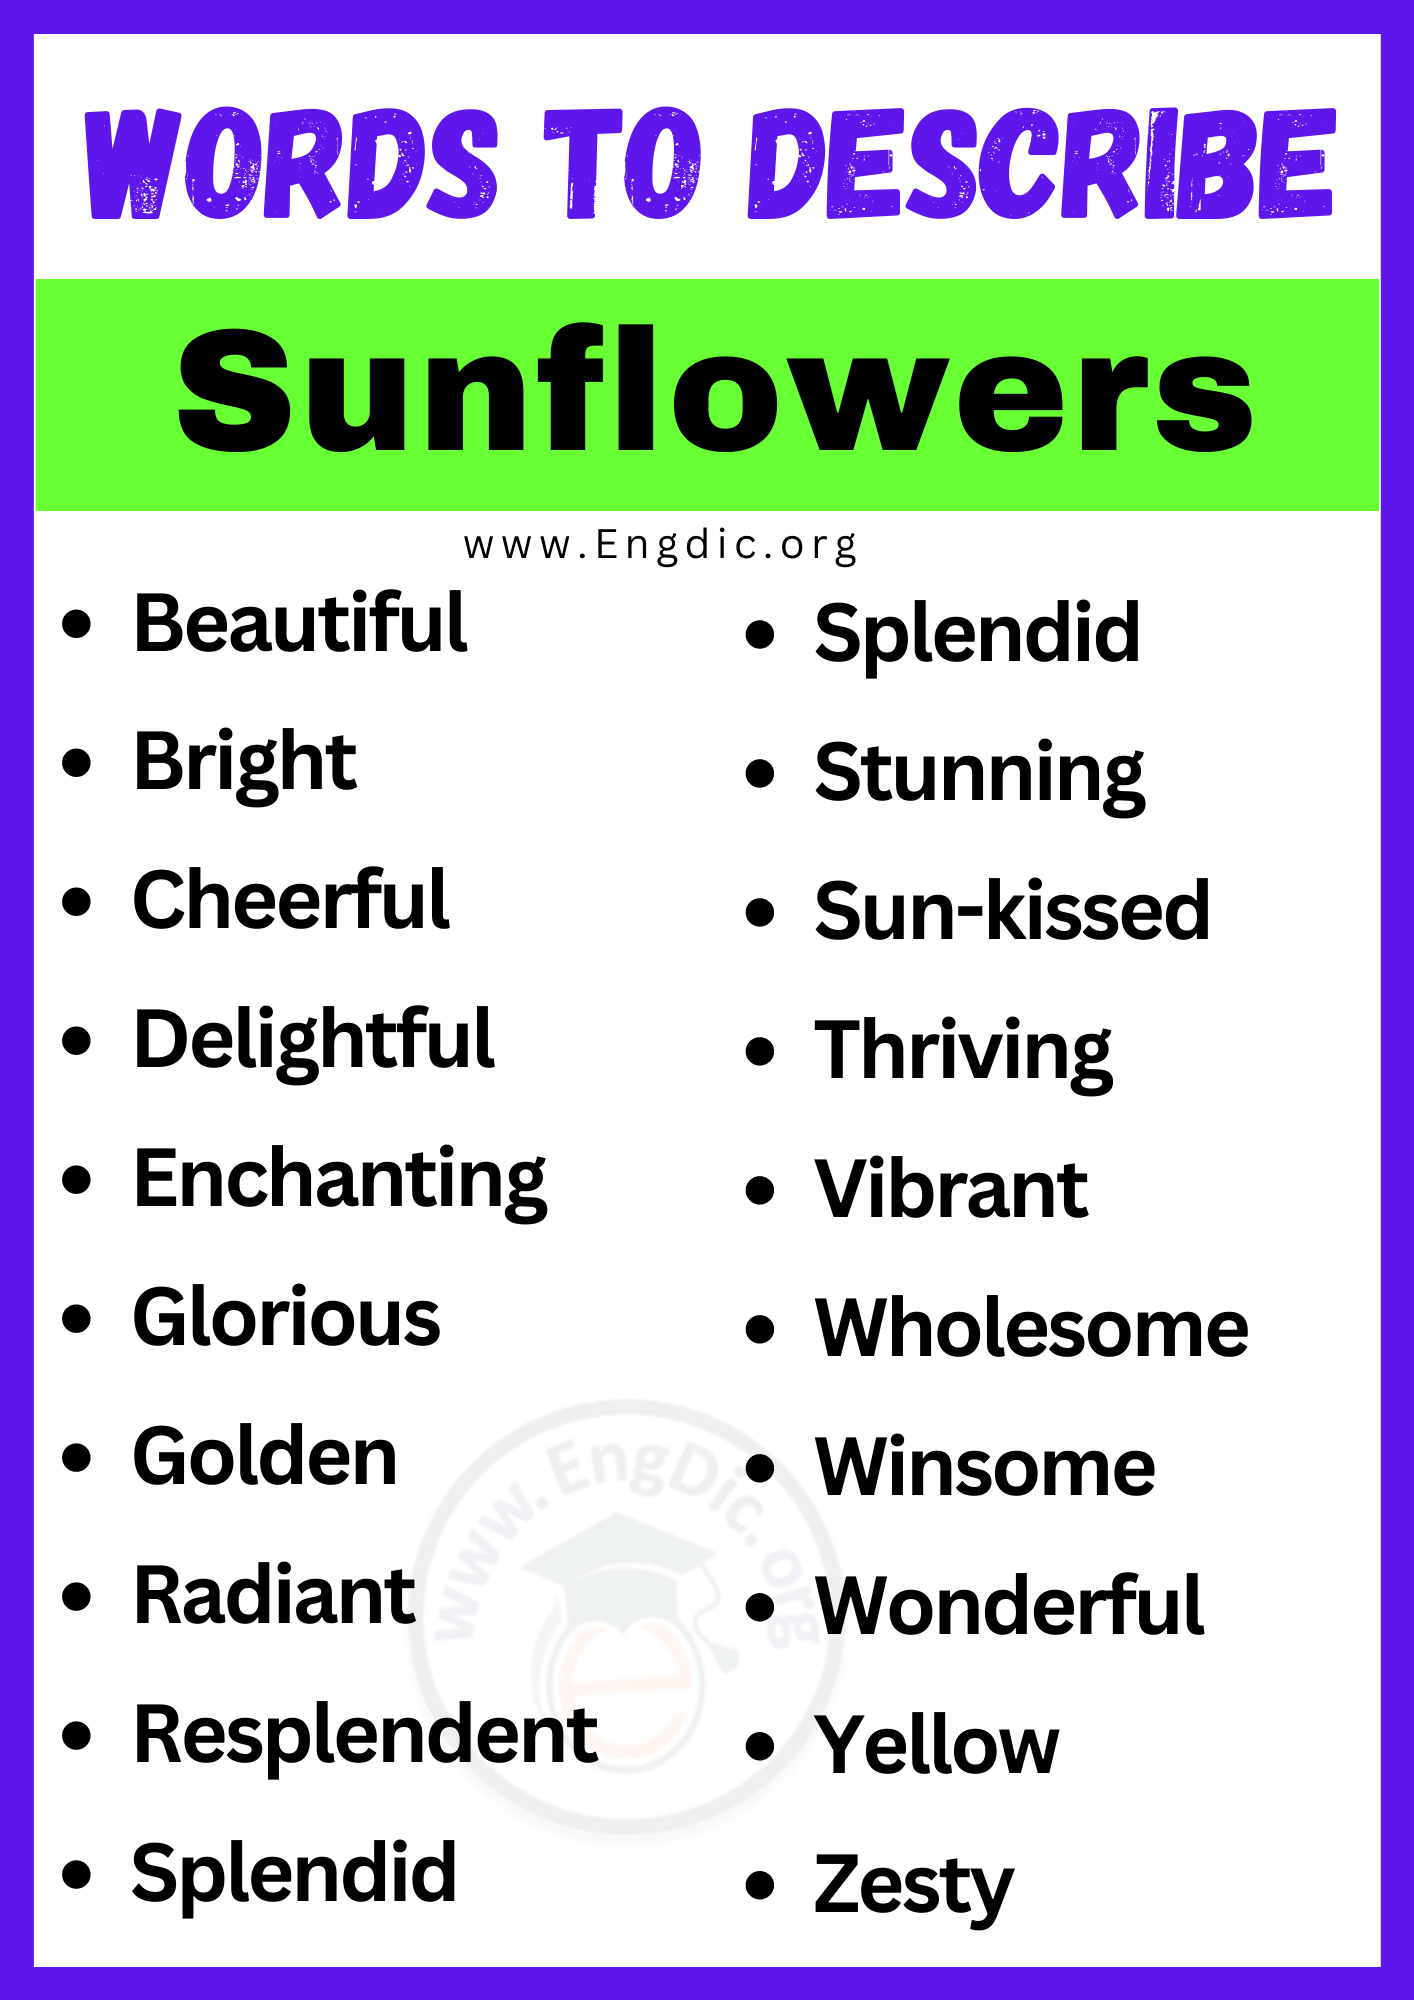 Words to Describe Sunflowers